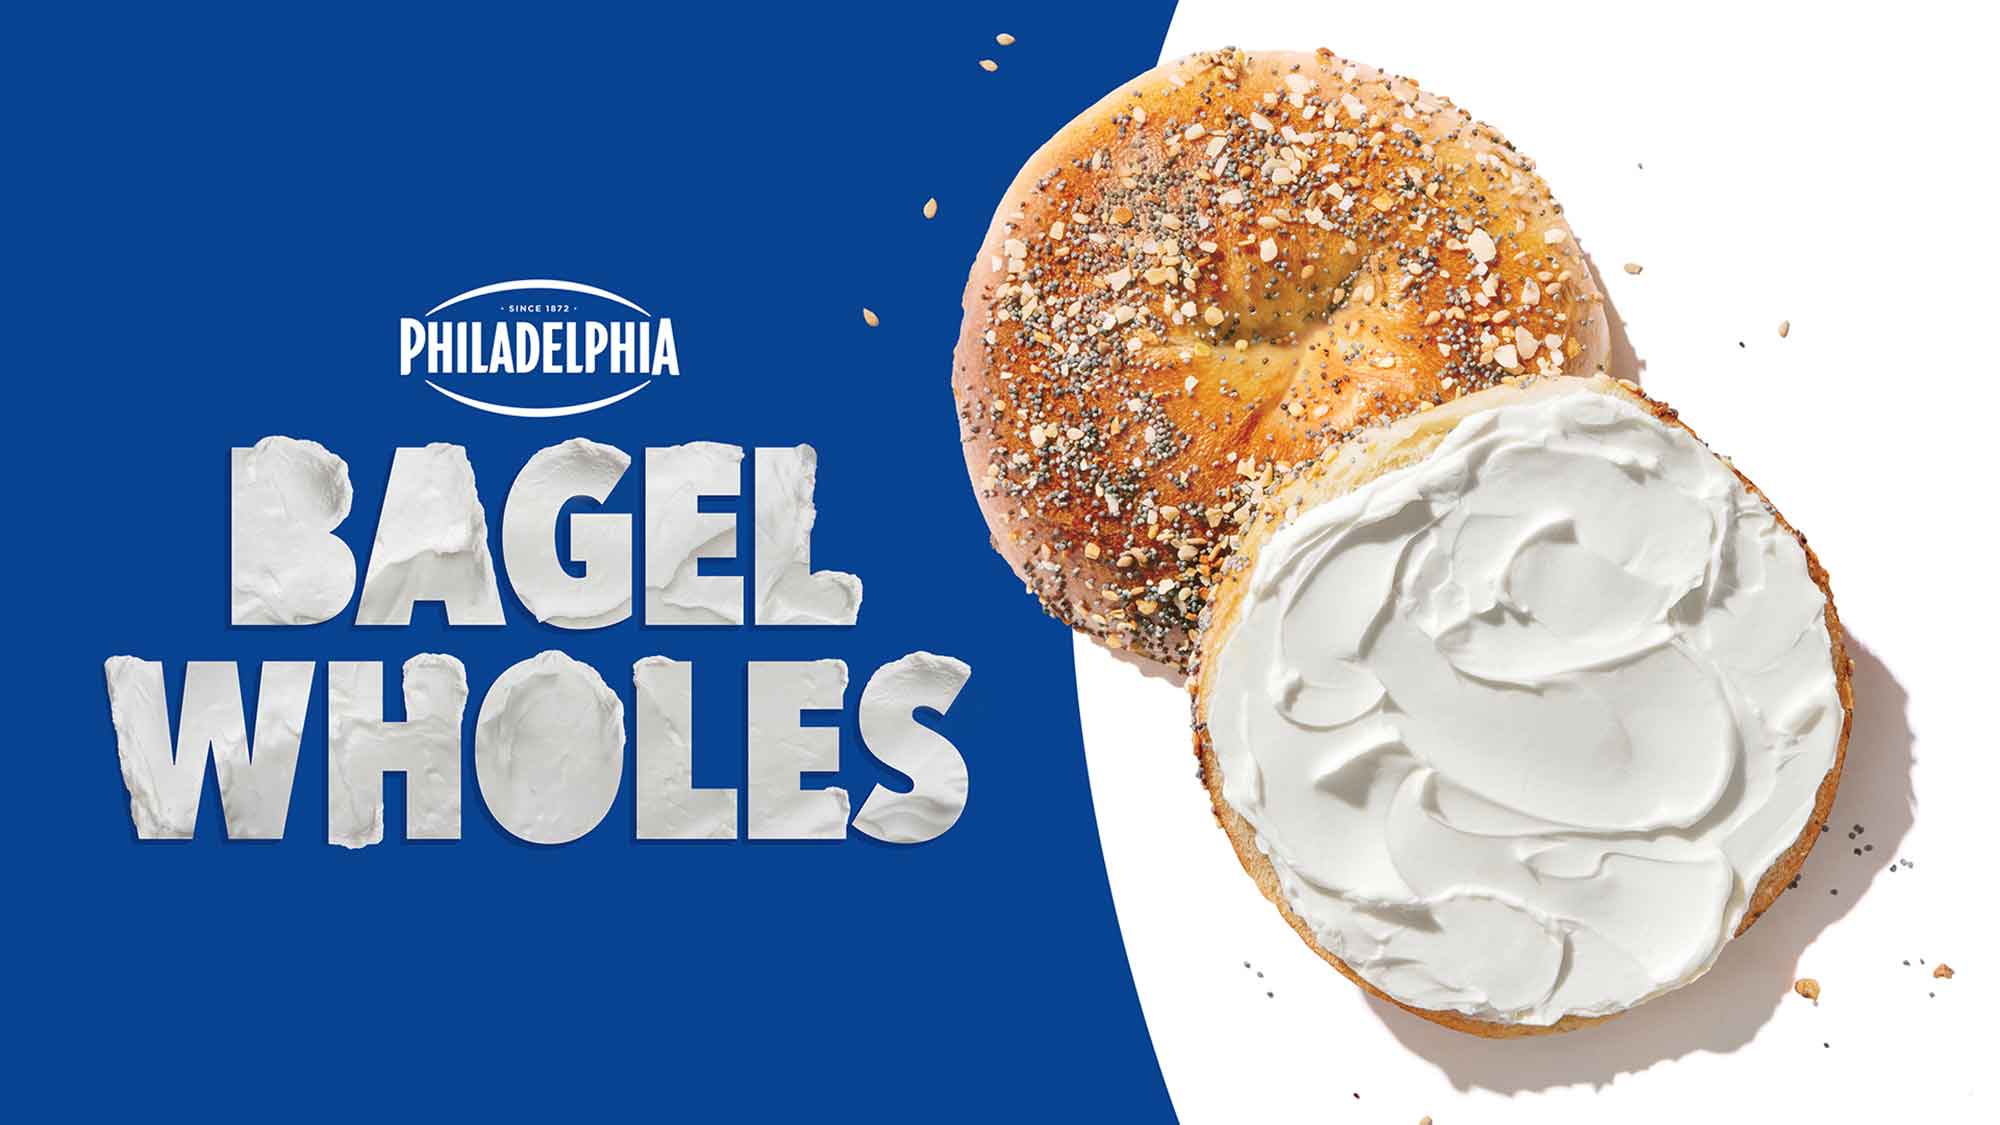 Philadelphia Cream Cheese Debuts its First Ever No Hole Bagel in Partnership with North America’s Most Beloved Bagel Shops